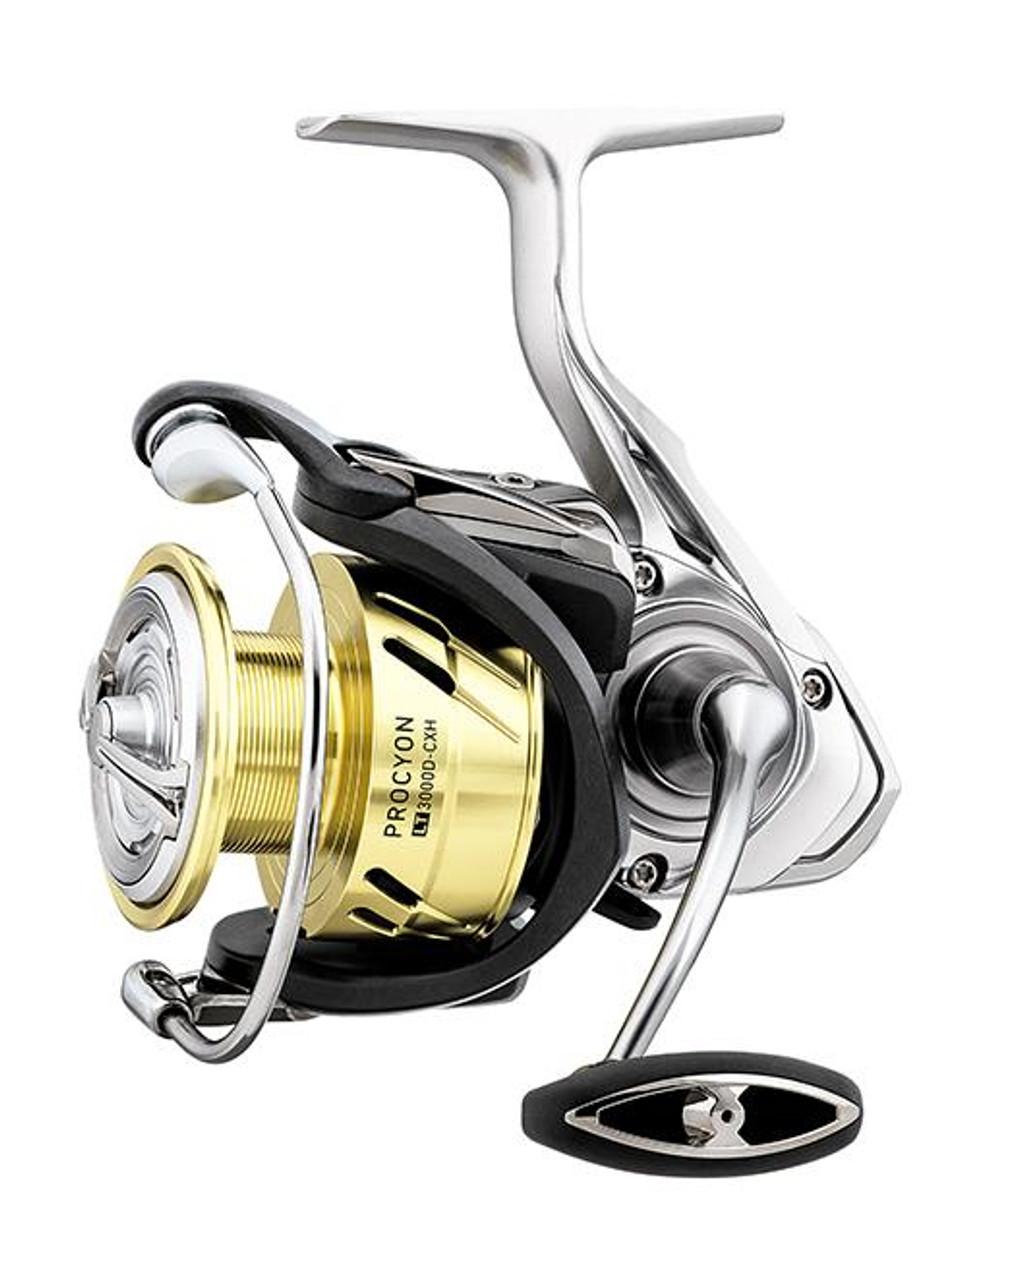 J&H Tackle - Daiwa Procyon AL LT Spinning Reels are in